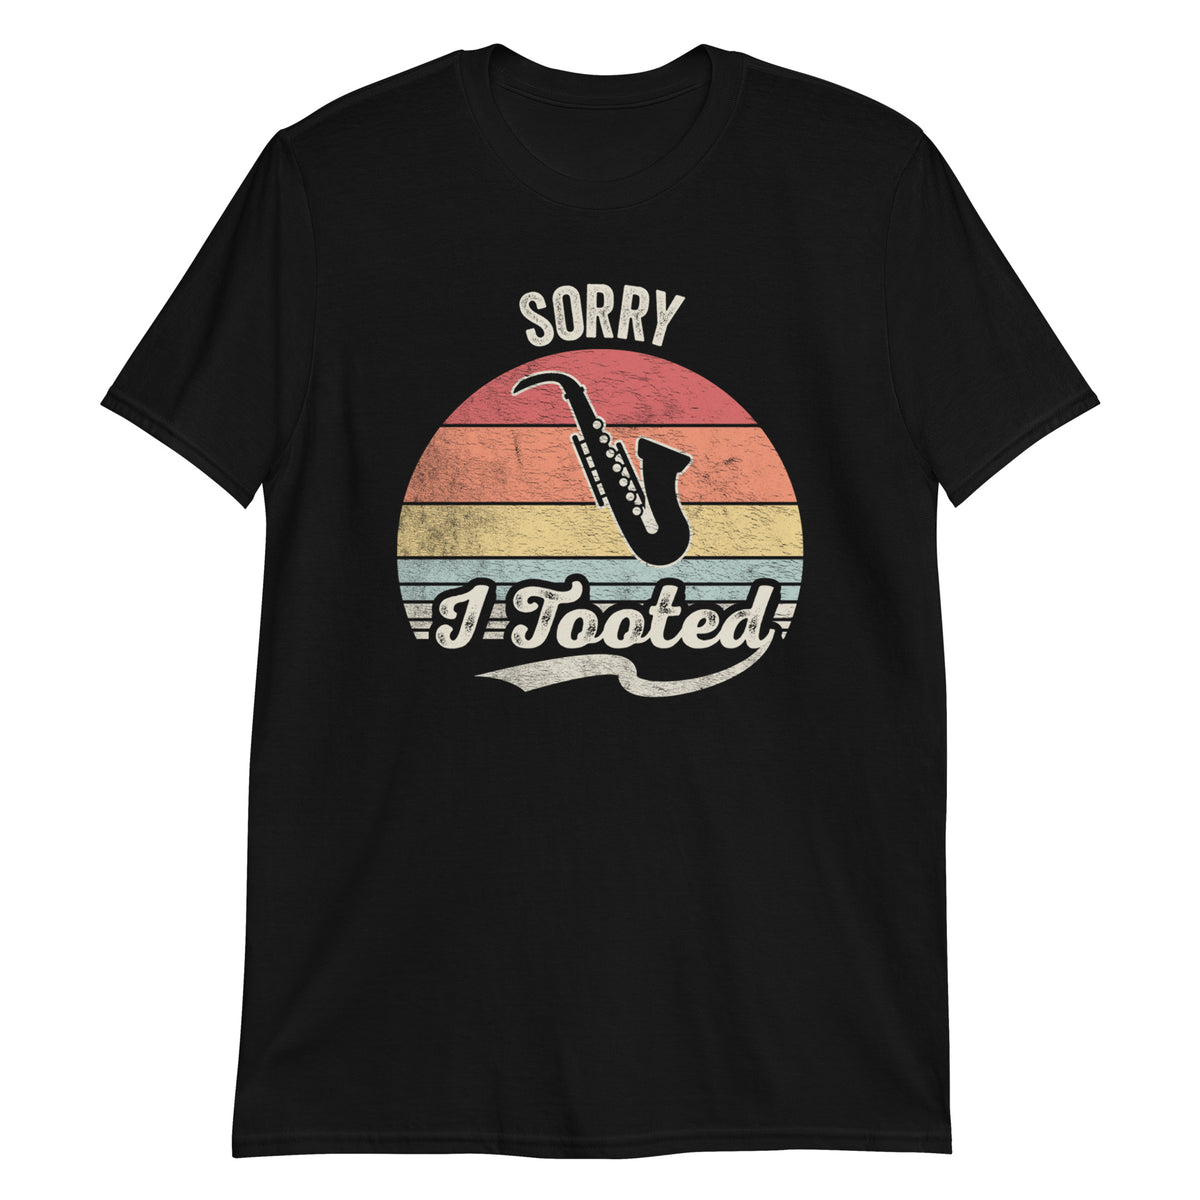 Sorry I Tooted Trumpet Music Marching Band Nerd Gift T-Shirt